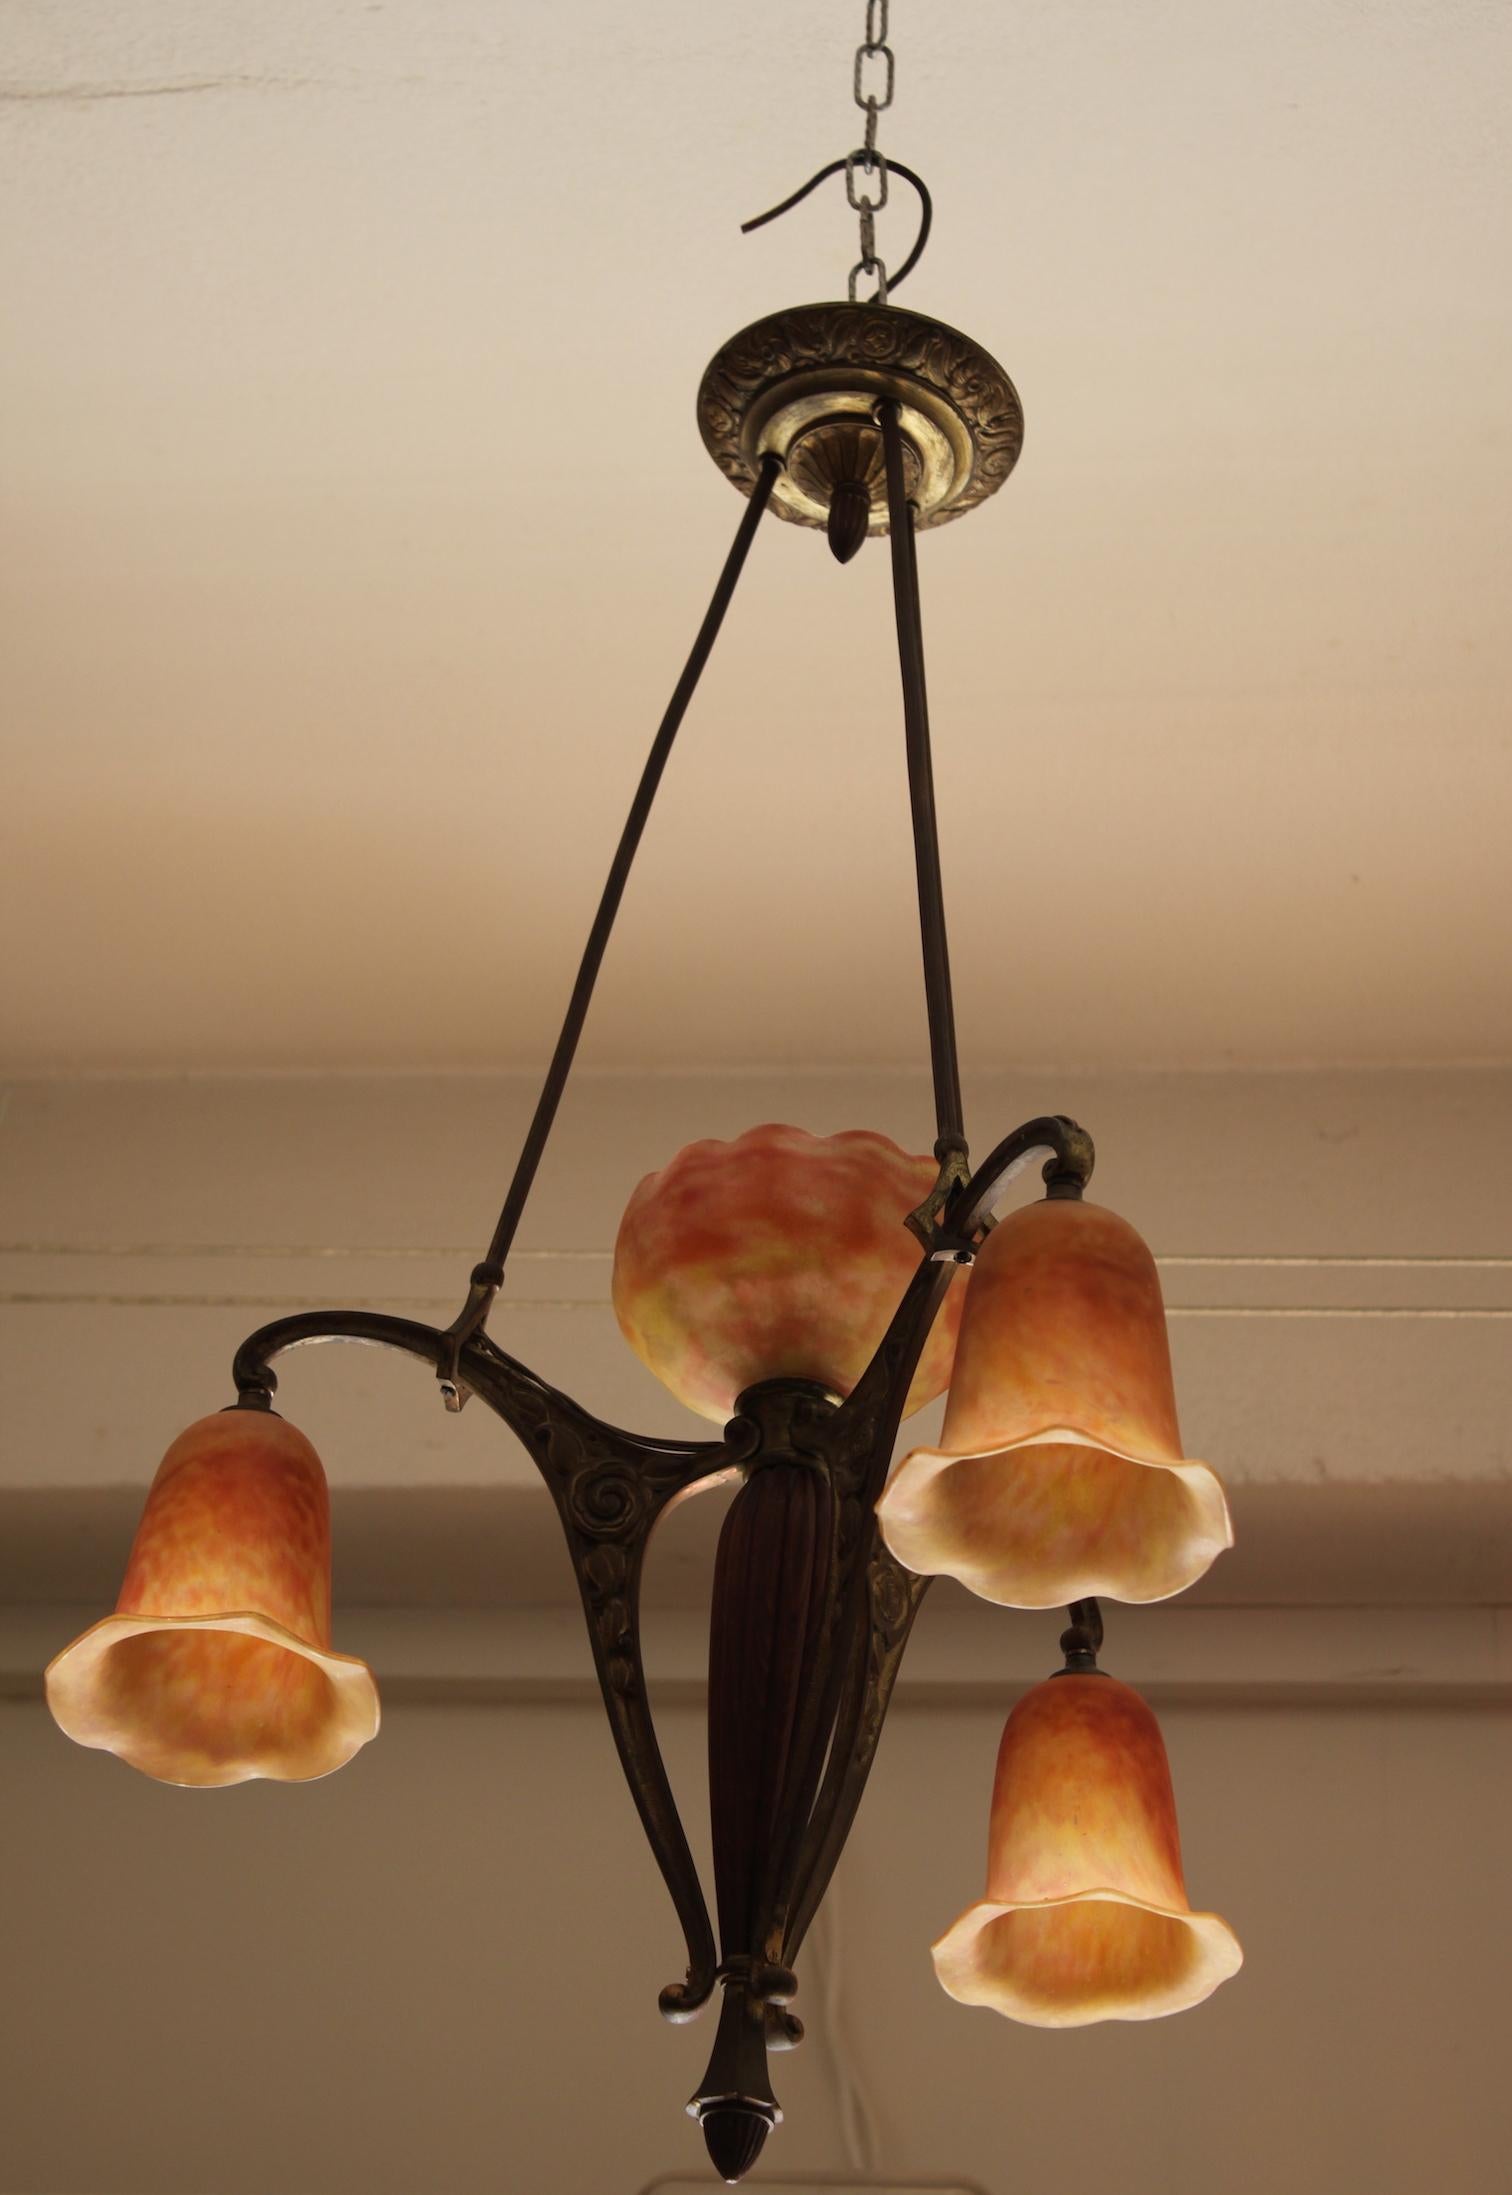 Art Deco Daum four-light chandelier with wooden and patinated bronze structure, can be Majorelle or Brandt. Four jade glass bulb covers, including three polylobed tulips and a central corolla in form of a flower, pink-orange and yellow colored